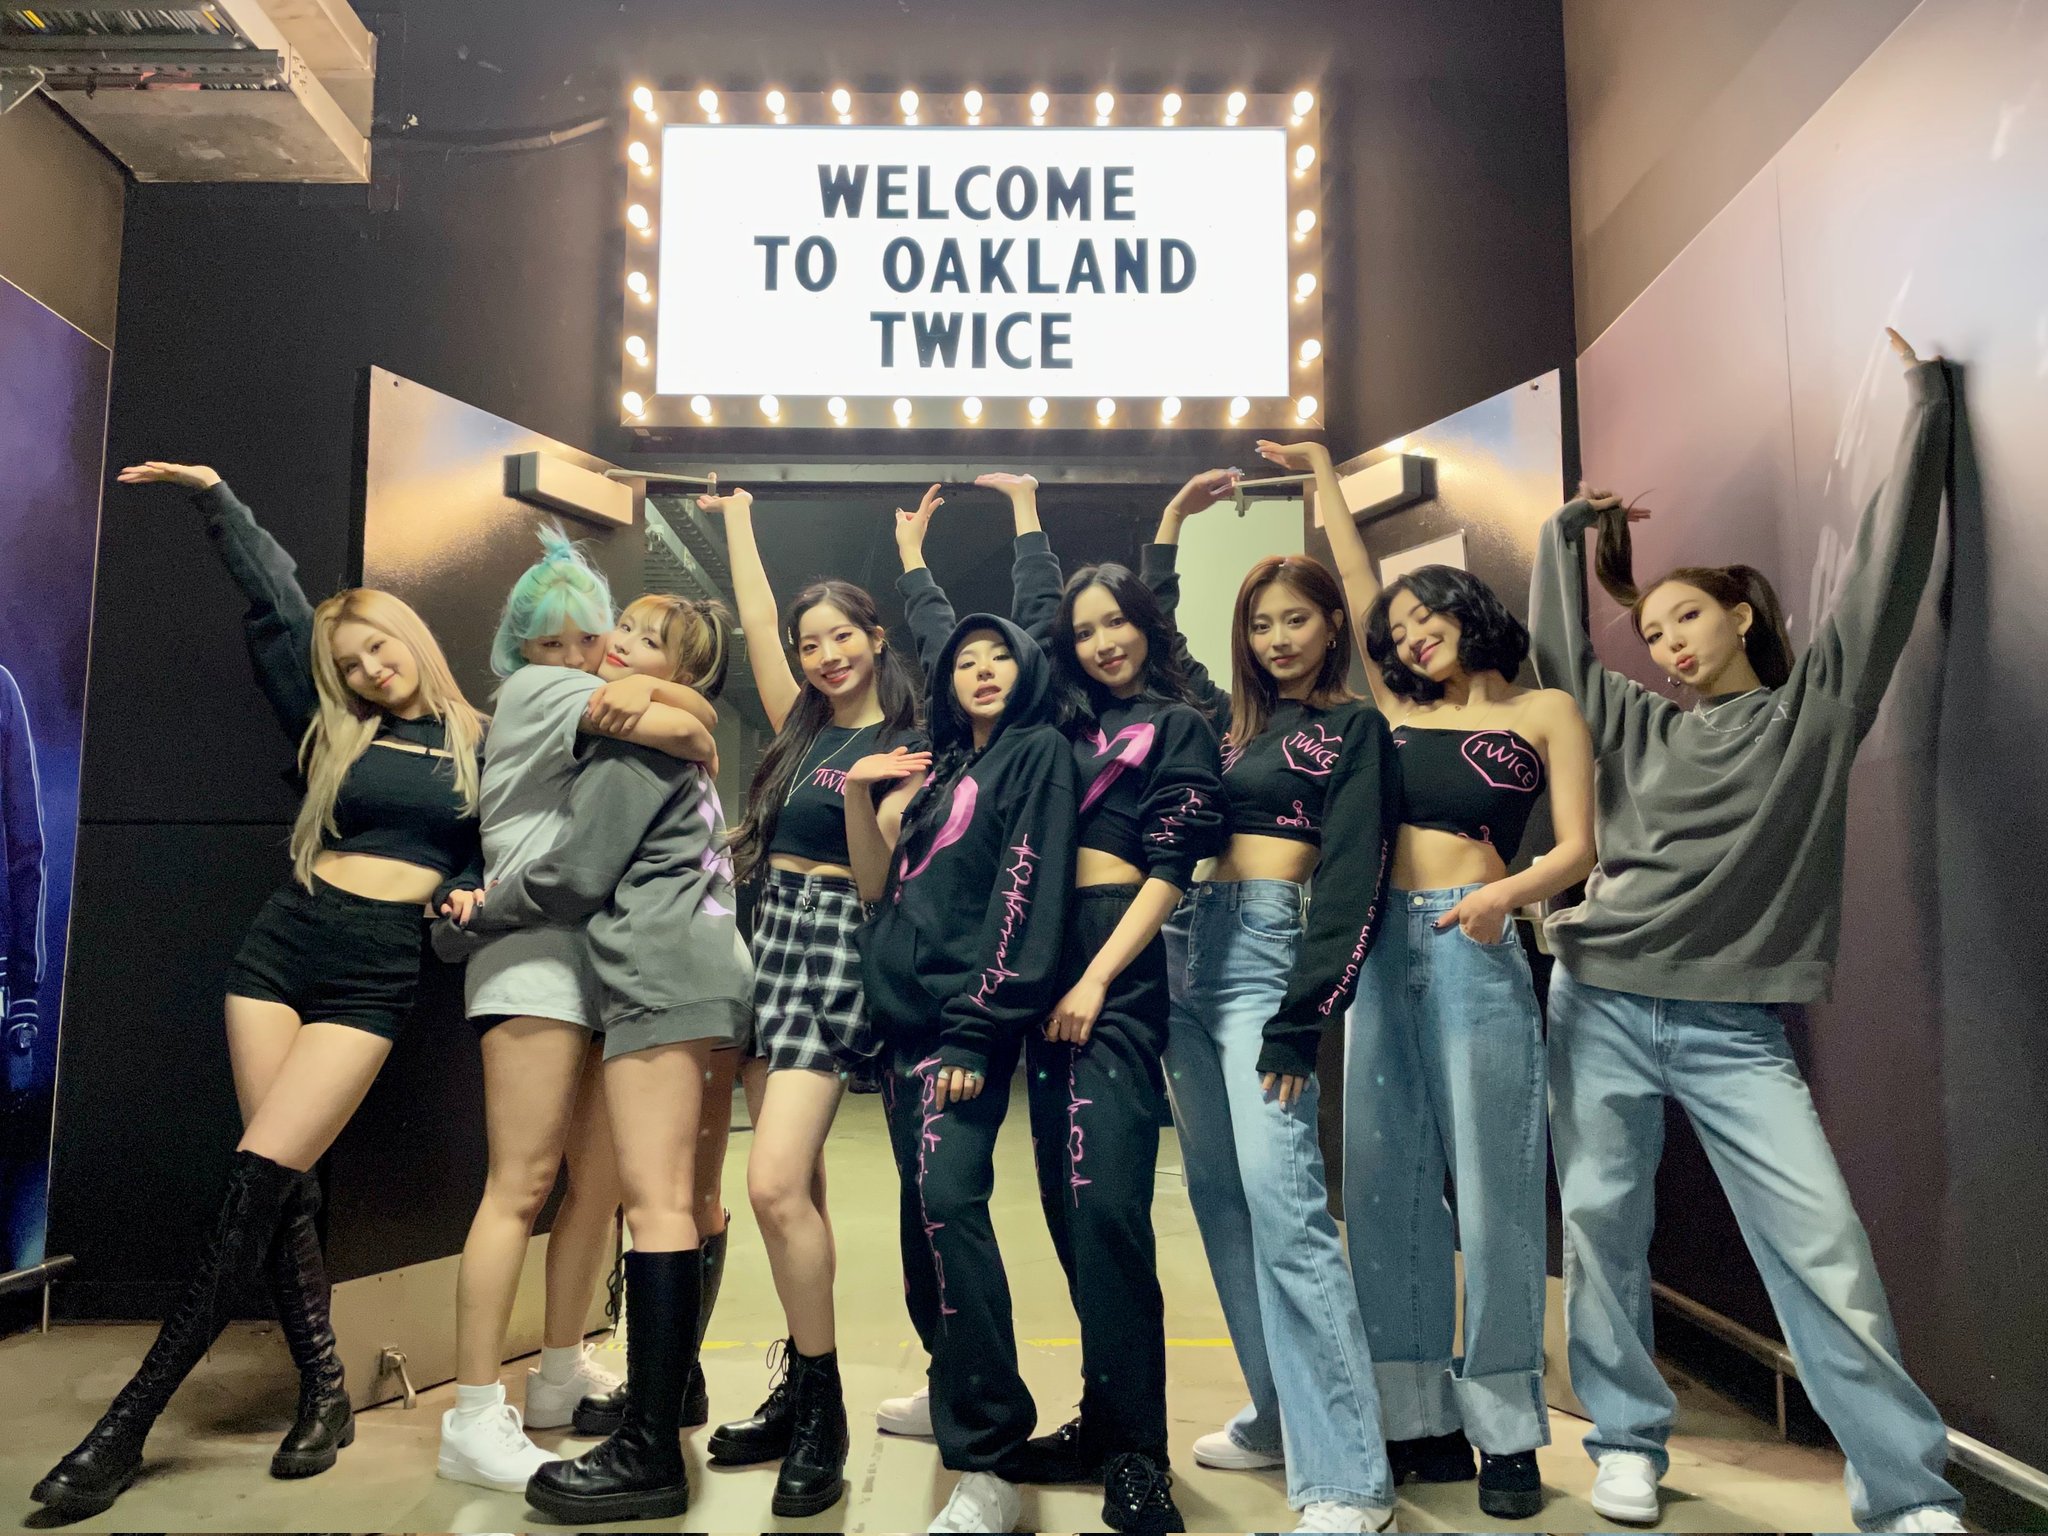 Welcome-to-Oakland-twice.jpg